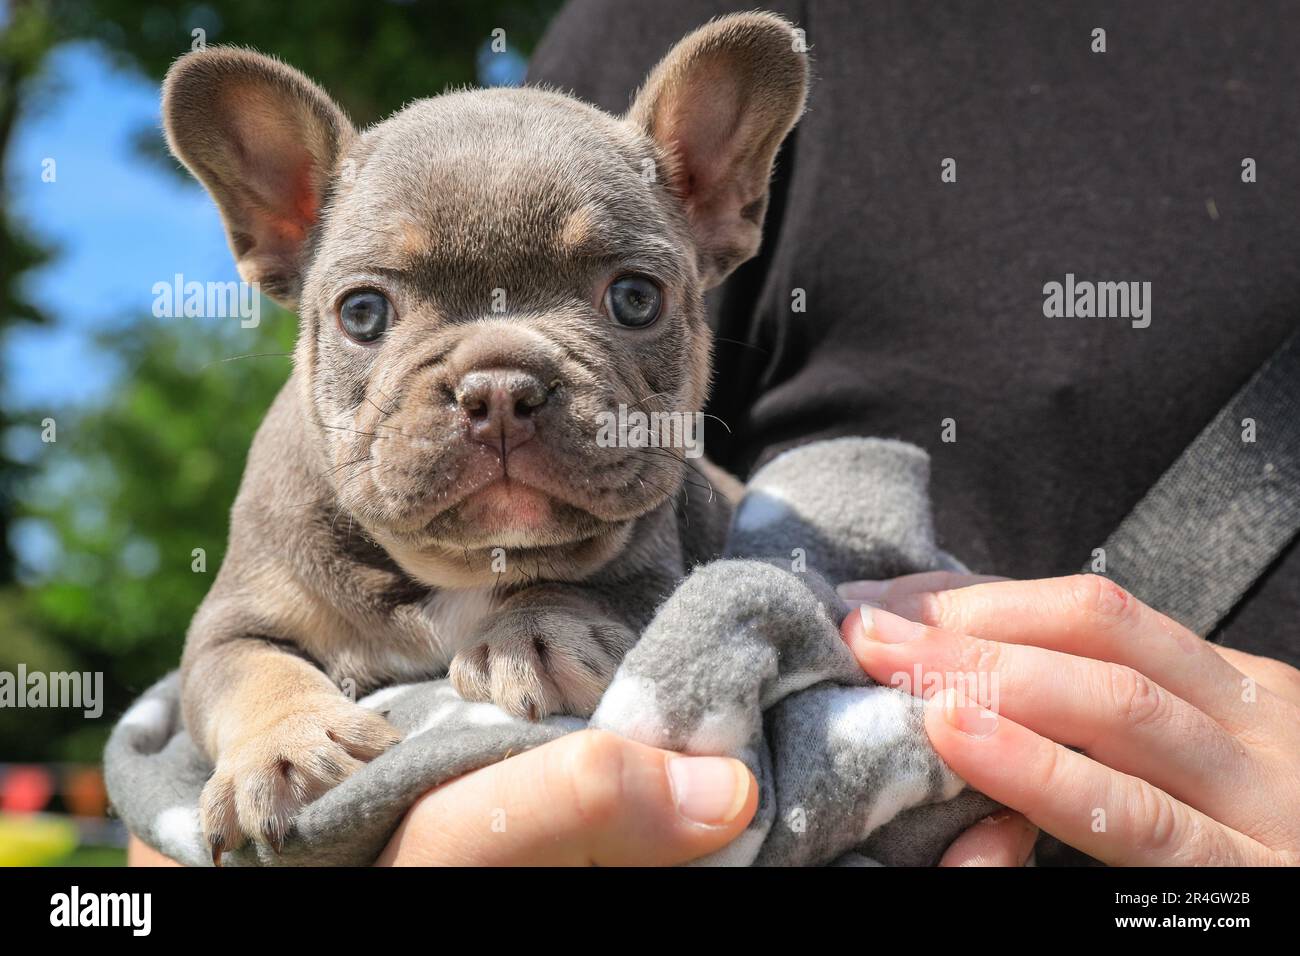 London, UK. 28th May, 2023. Chase, a cute 2 month old French Bulldog, will be competing in the Puppy category. Old Royal Naval College hosts the inaugural Greenwich Dog Show. The 10 show categories include Waggiest Tail, Best Owner Lookalike, Best Dressed Pooch, Scruffiest Dog and Cutest Pup. Judges are celebrity guest Nina Wadia, influencer Aurélie Four with corgi Marcel, Matthew Mees CEO and a Christopher Wren lookalike. Credit: Imageplotter/Alamy Live News Stock Photo